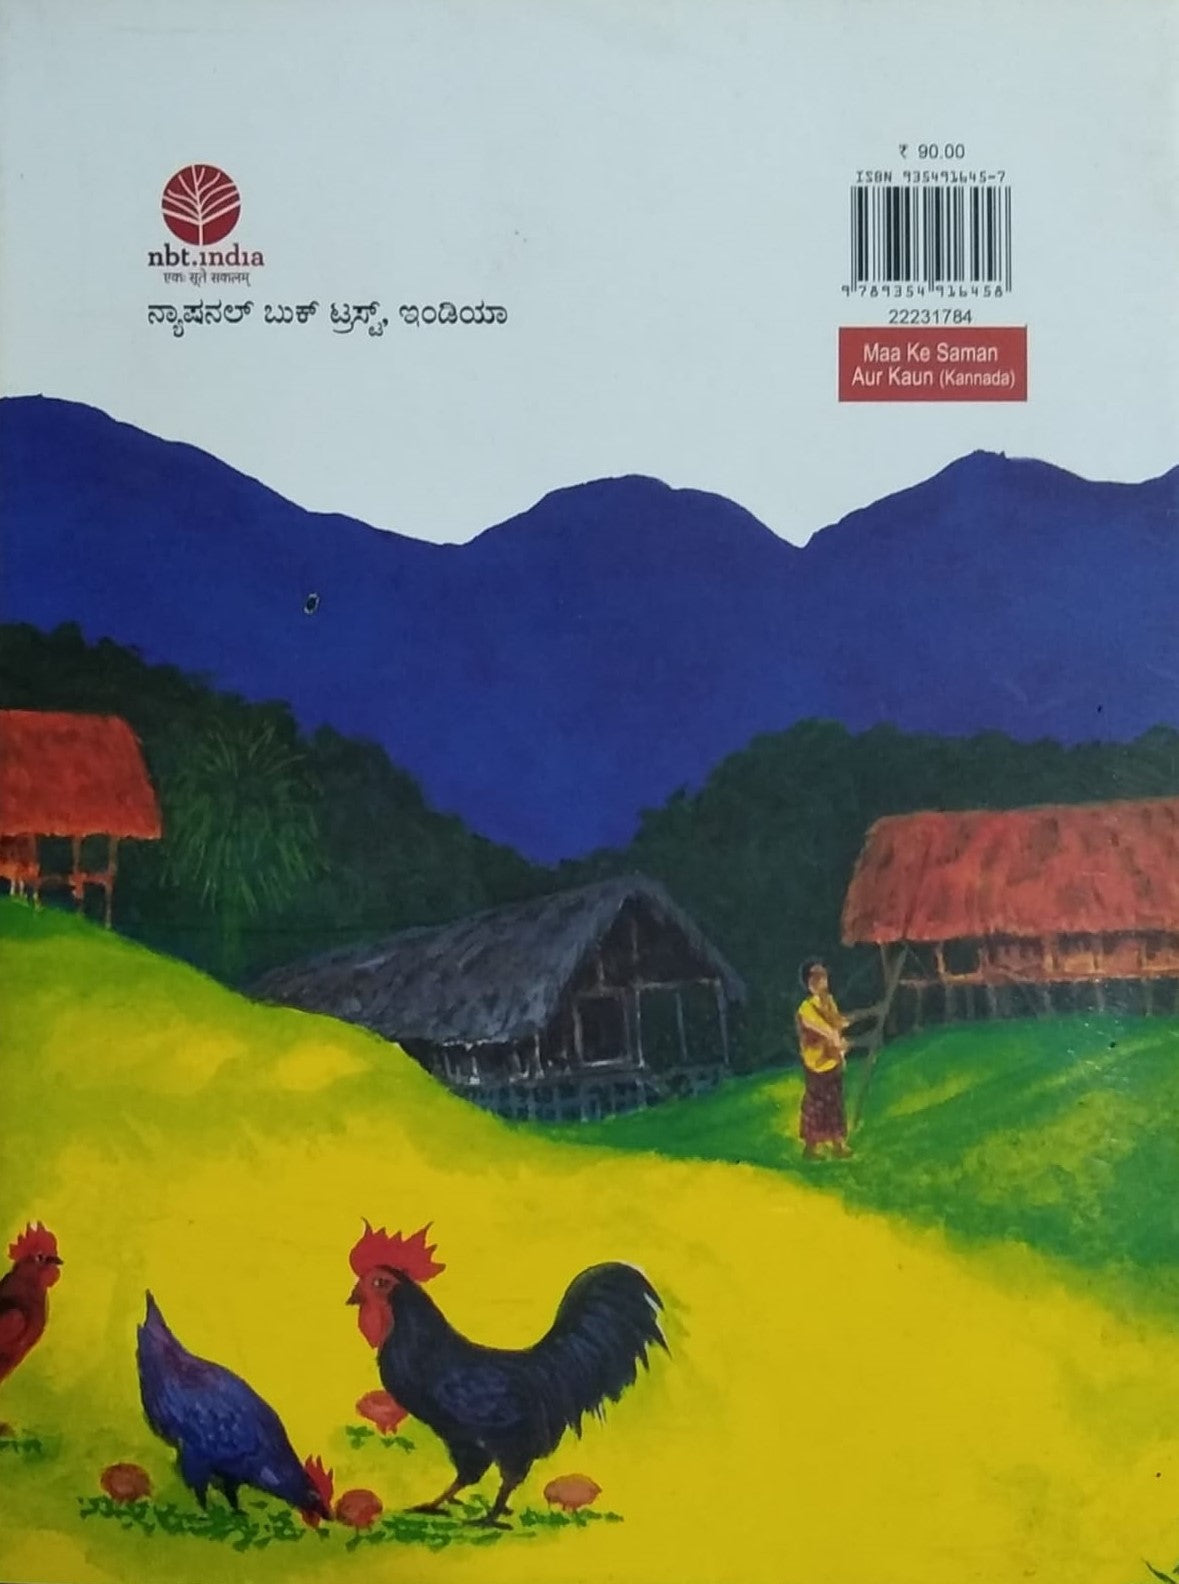 'Taayige Samaanaraaru' is a Children's Book which is Translated to Kannada by Dr. T. G. Prabhashankar 'Premi' and Published by National Book Trust